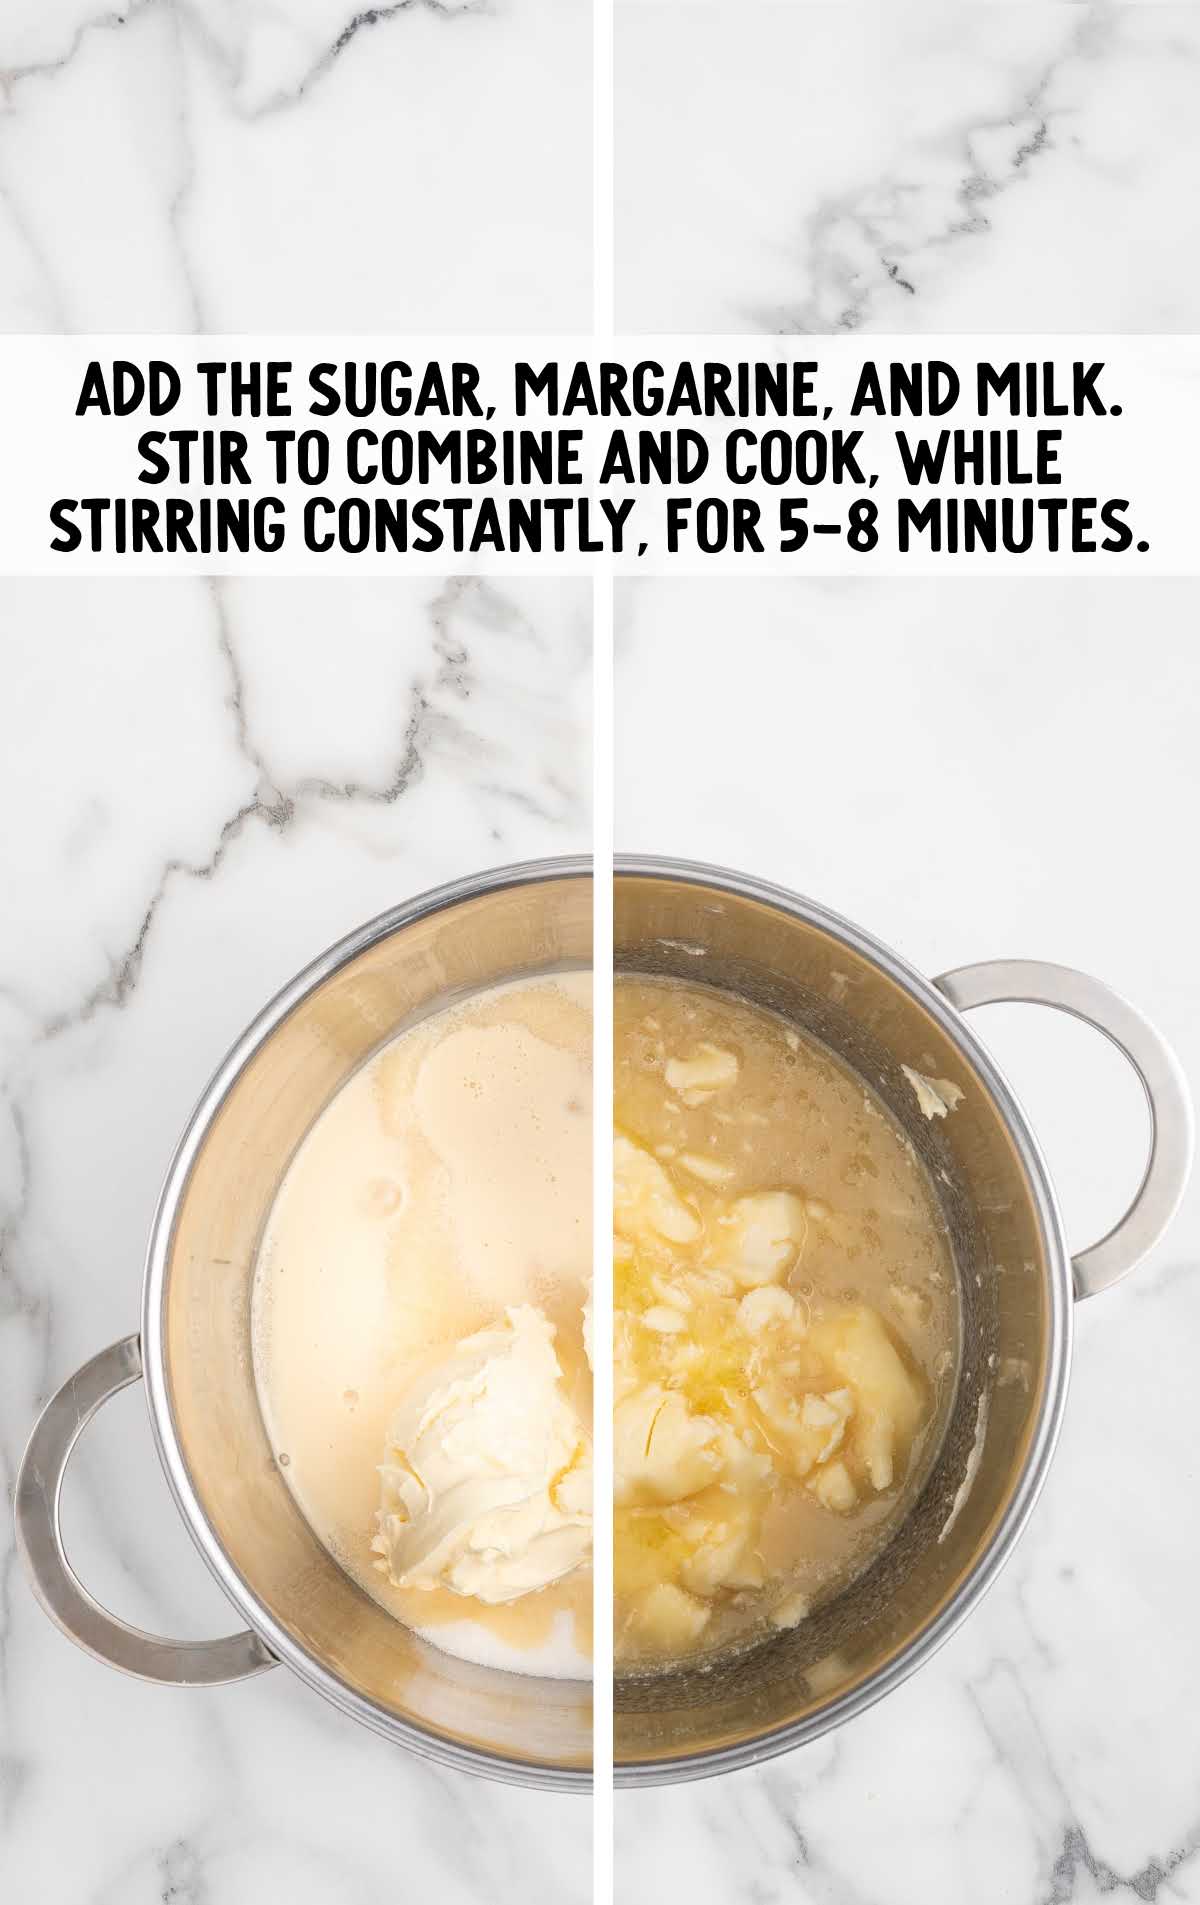 sugar, margarine, and milk combined together and stirred